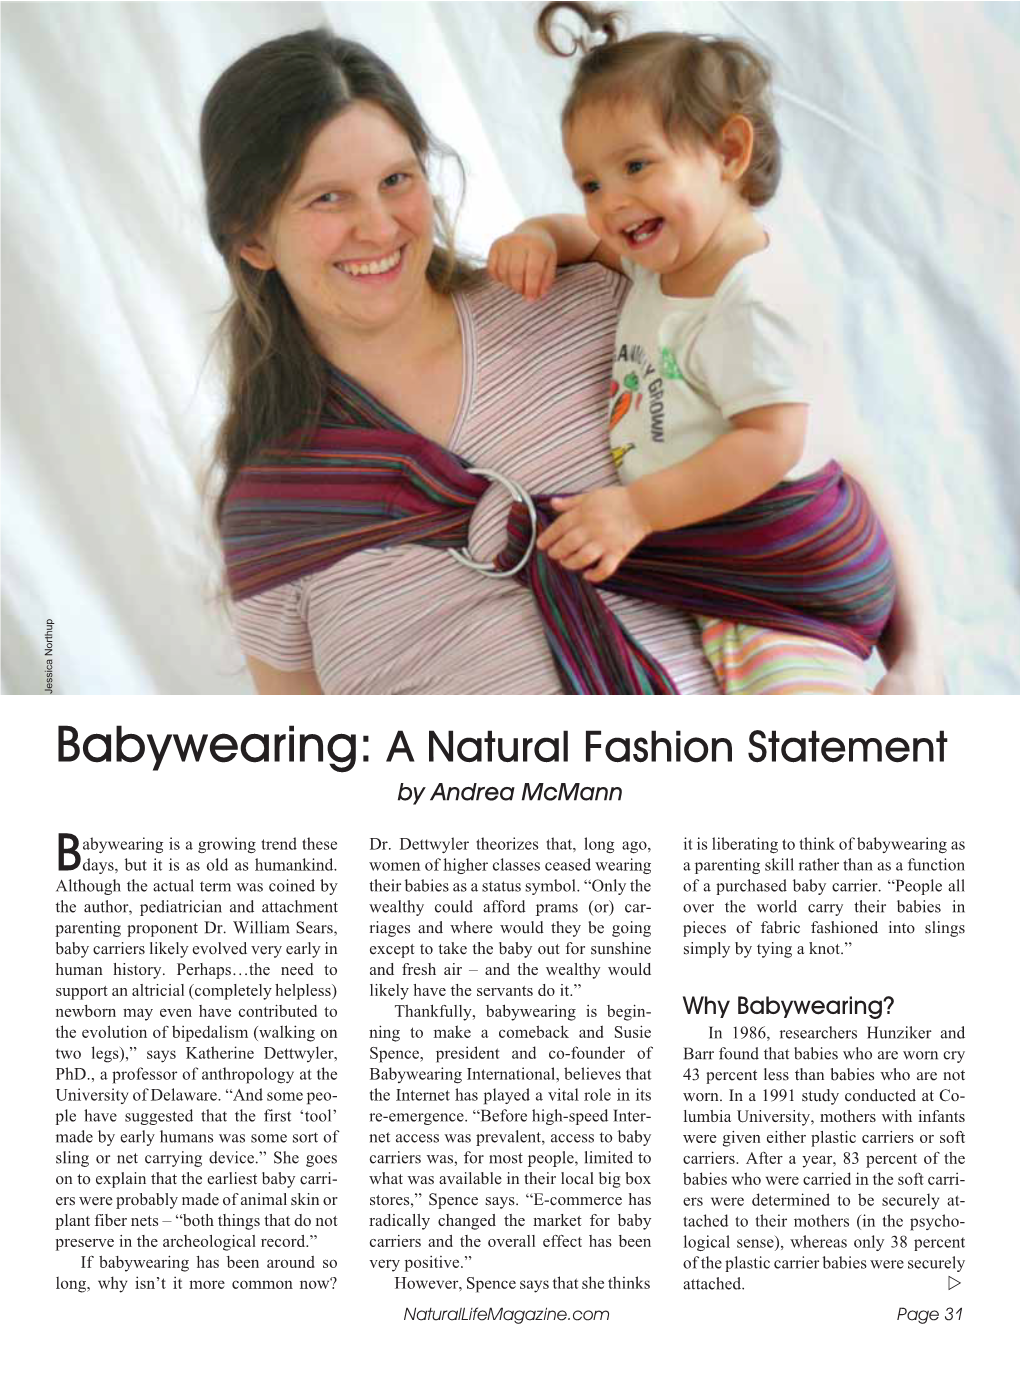 Babywearing: a Natural Fashion Statement by Andrea Mcmann